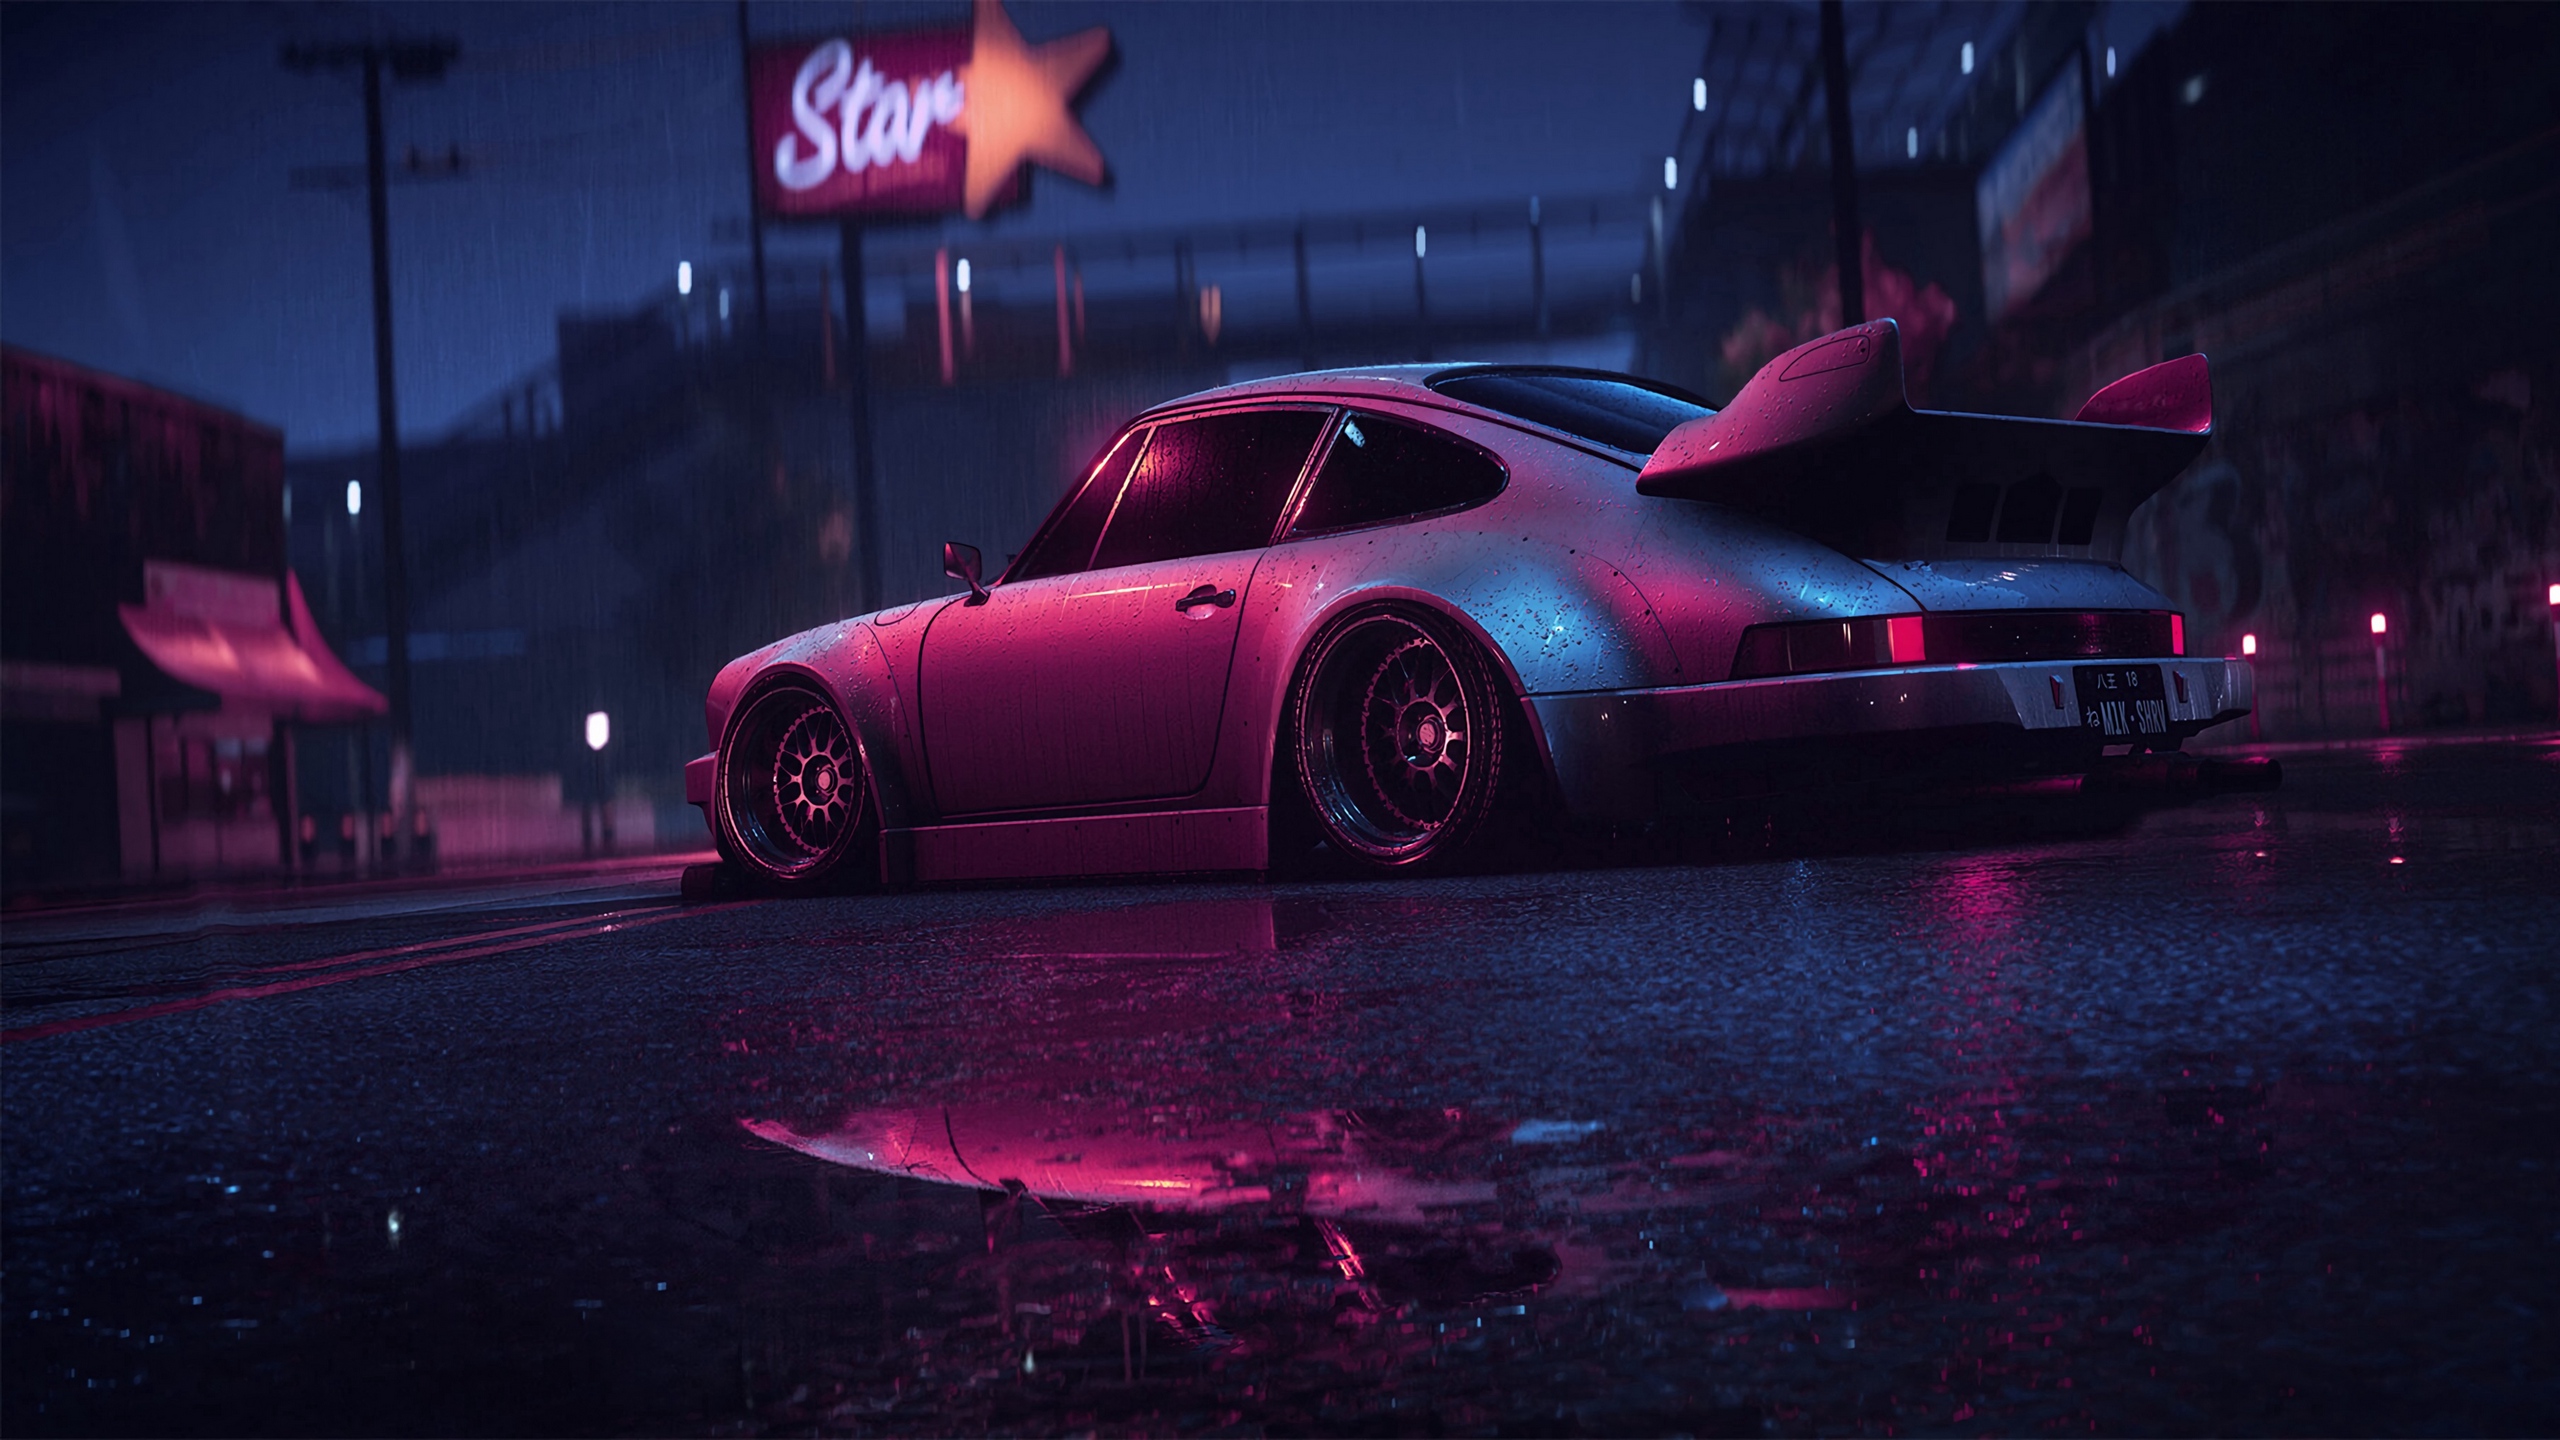 Need For Speed Video Games Game Art Atmosphere Lights Neon Neon Lights Vehicle Car Porsche 911 Carre 2560x1440